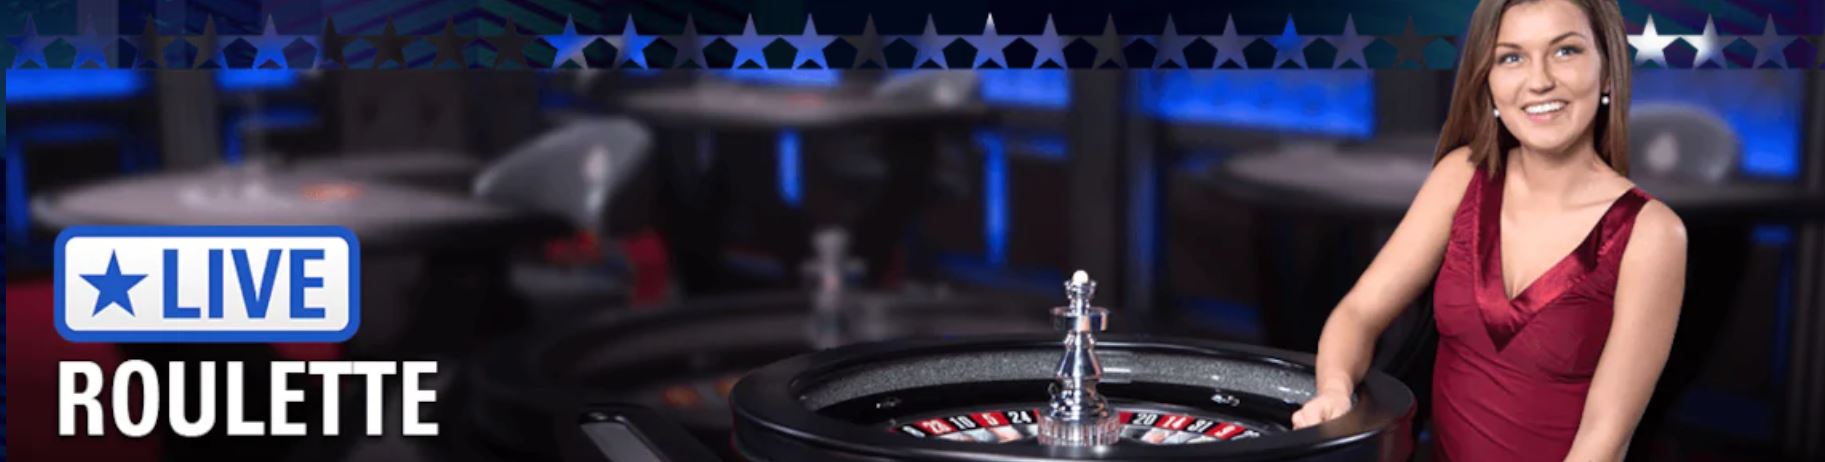 You can play roulette at pokerstars casino.